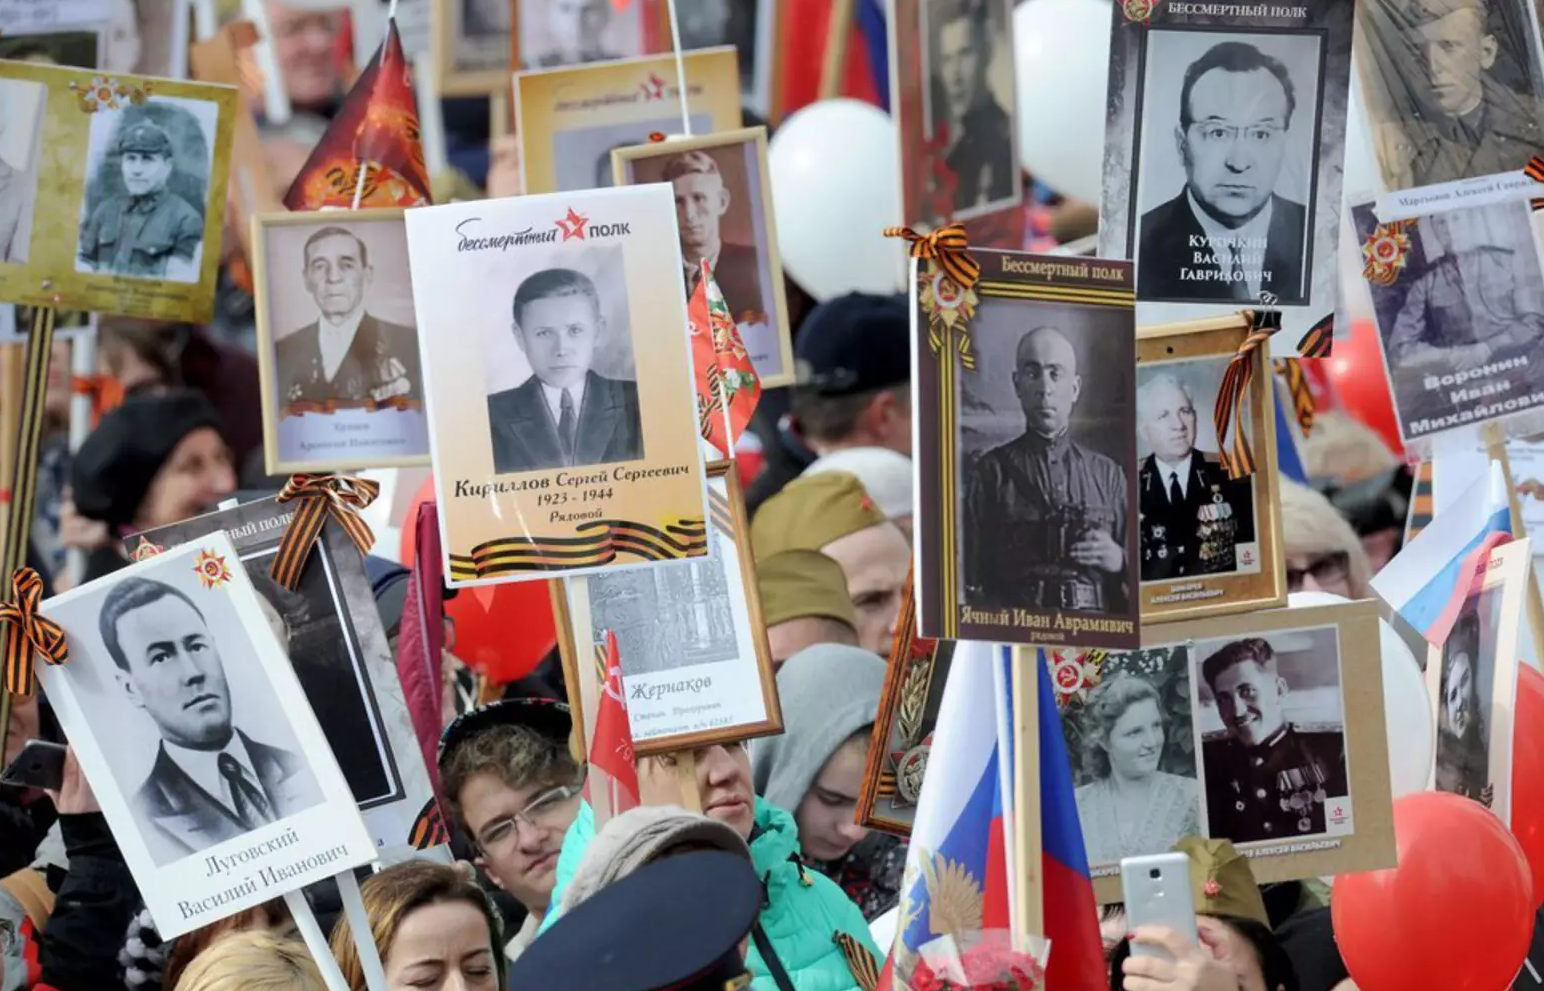 In the border areas of the Belgorod region, the procession of the "Immortal Regiment" was canceled